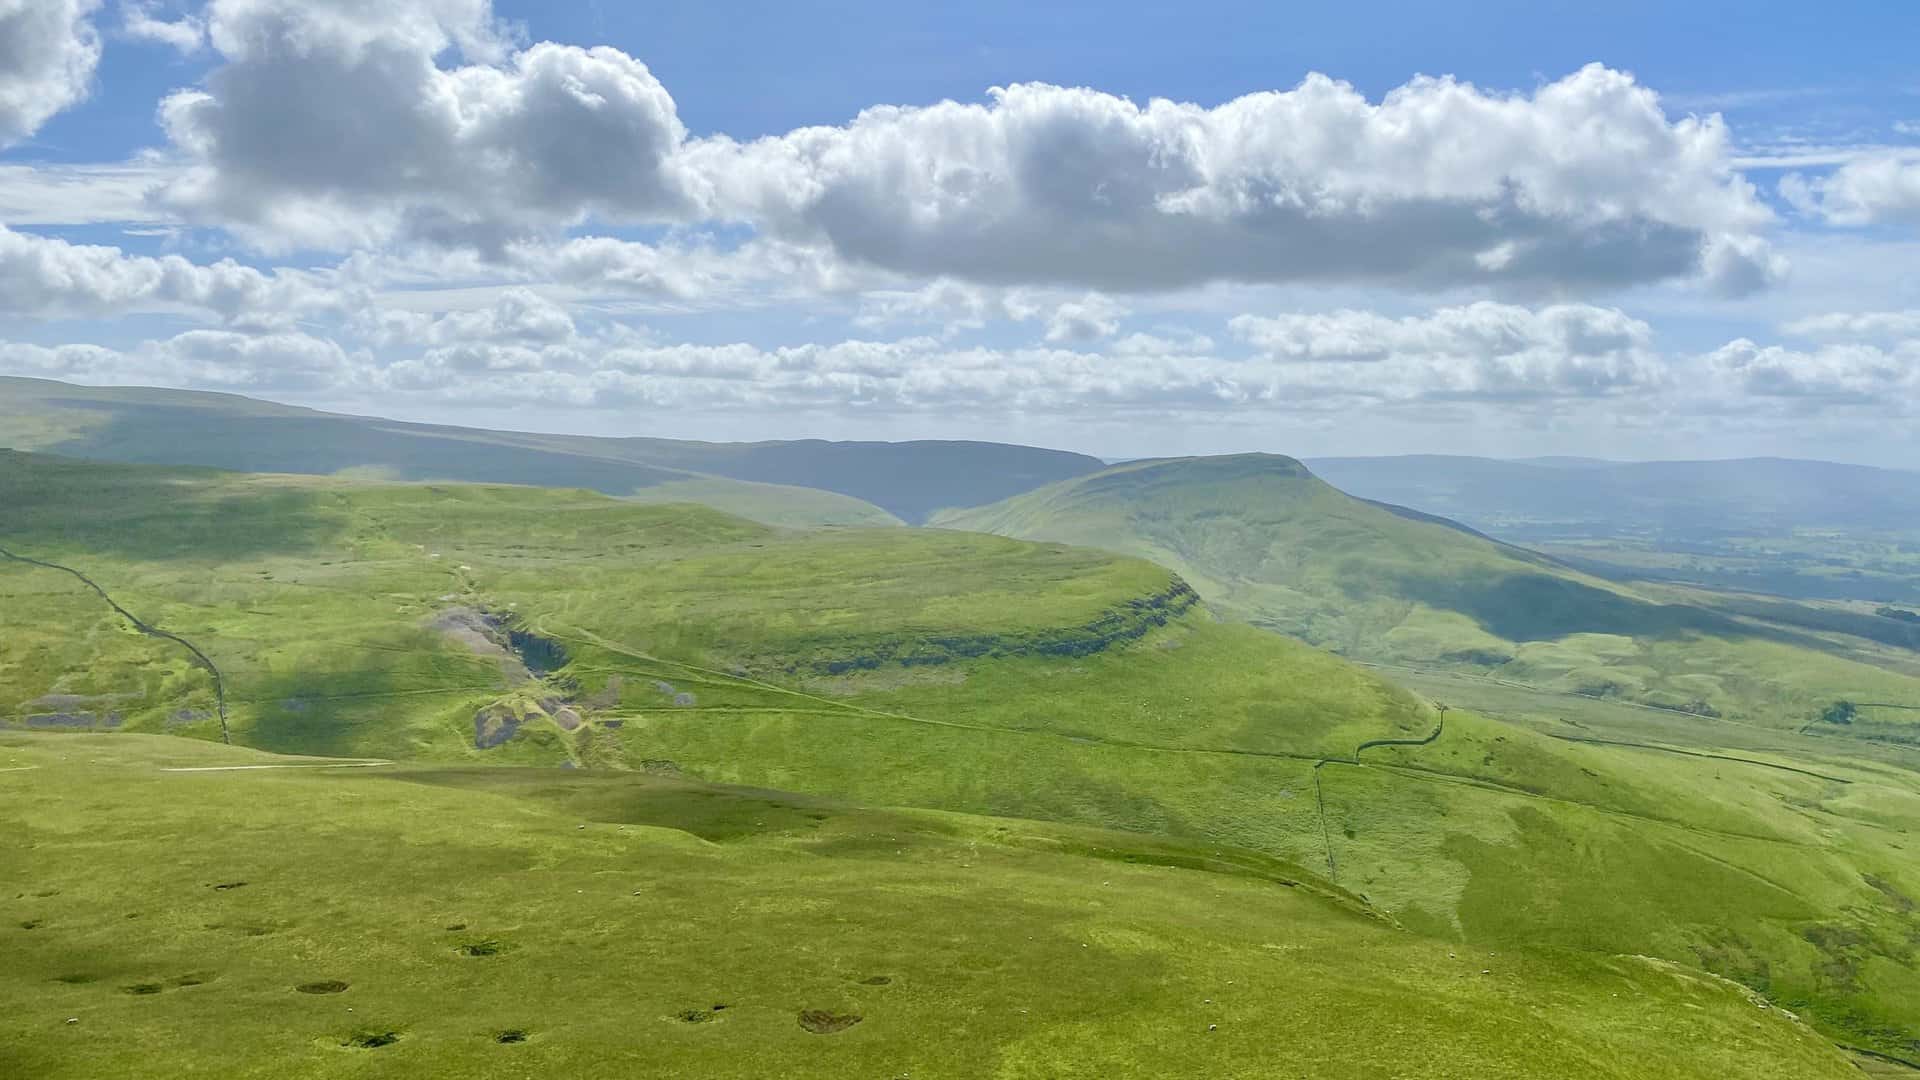 The view south-east from Murton Pike towards Delfekirk Scar, with Roman Fell in the distance.